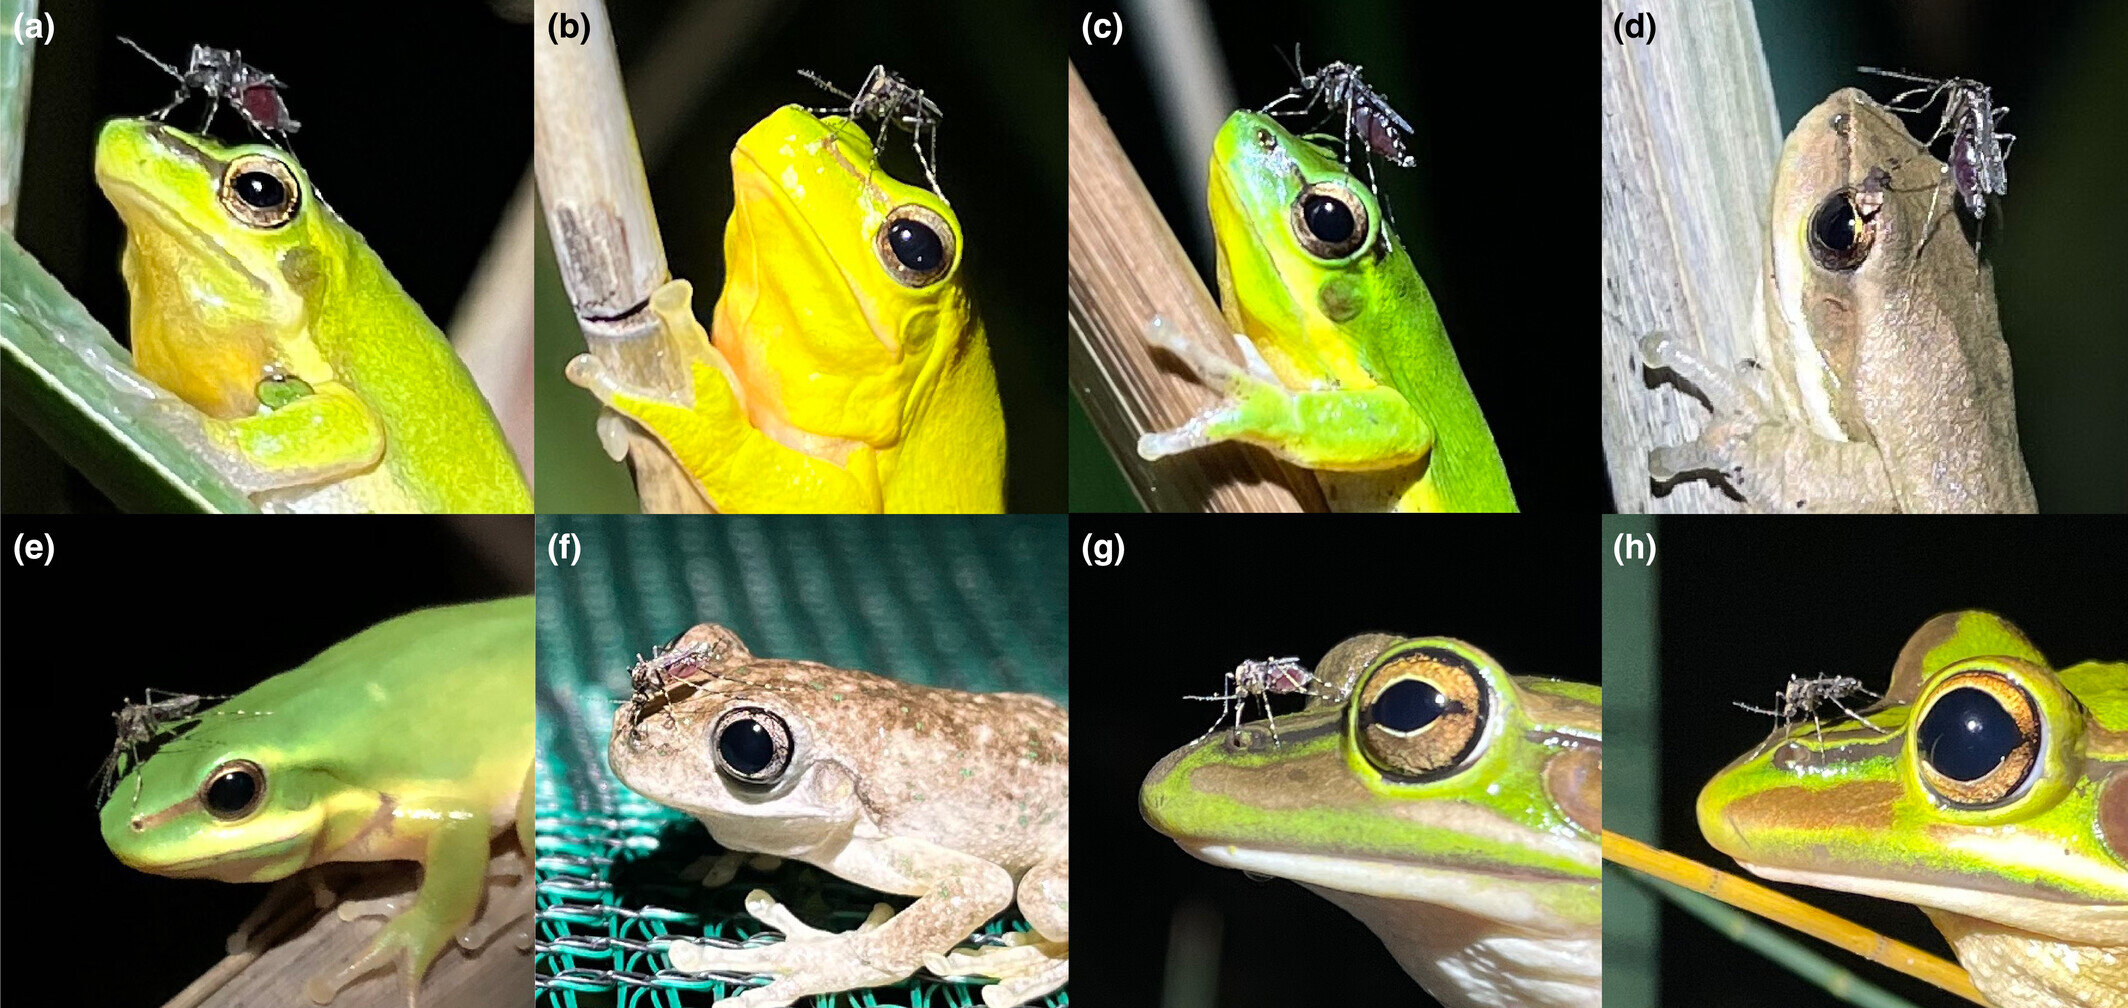 Australian mosquito species found to target frogs' noses